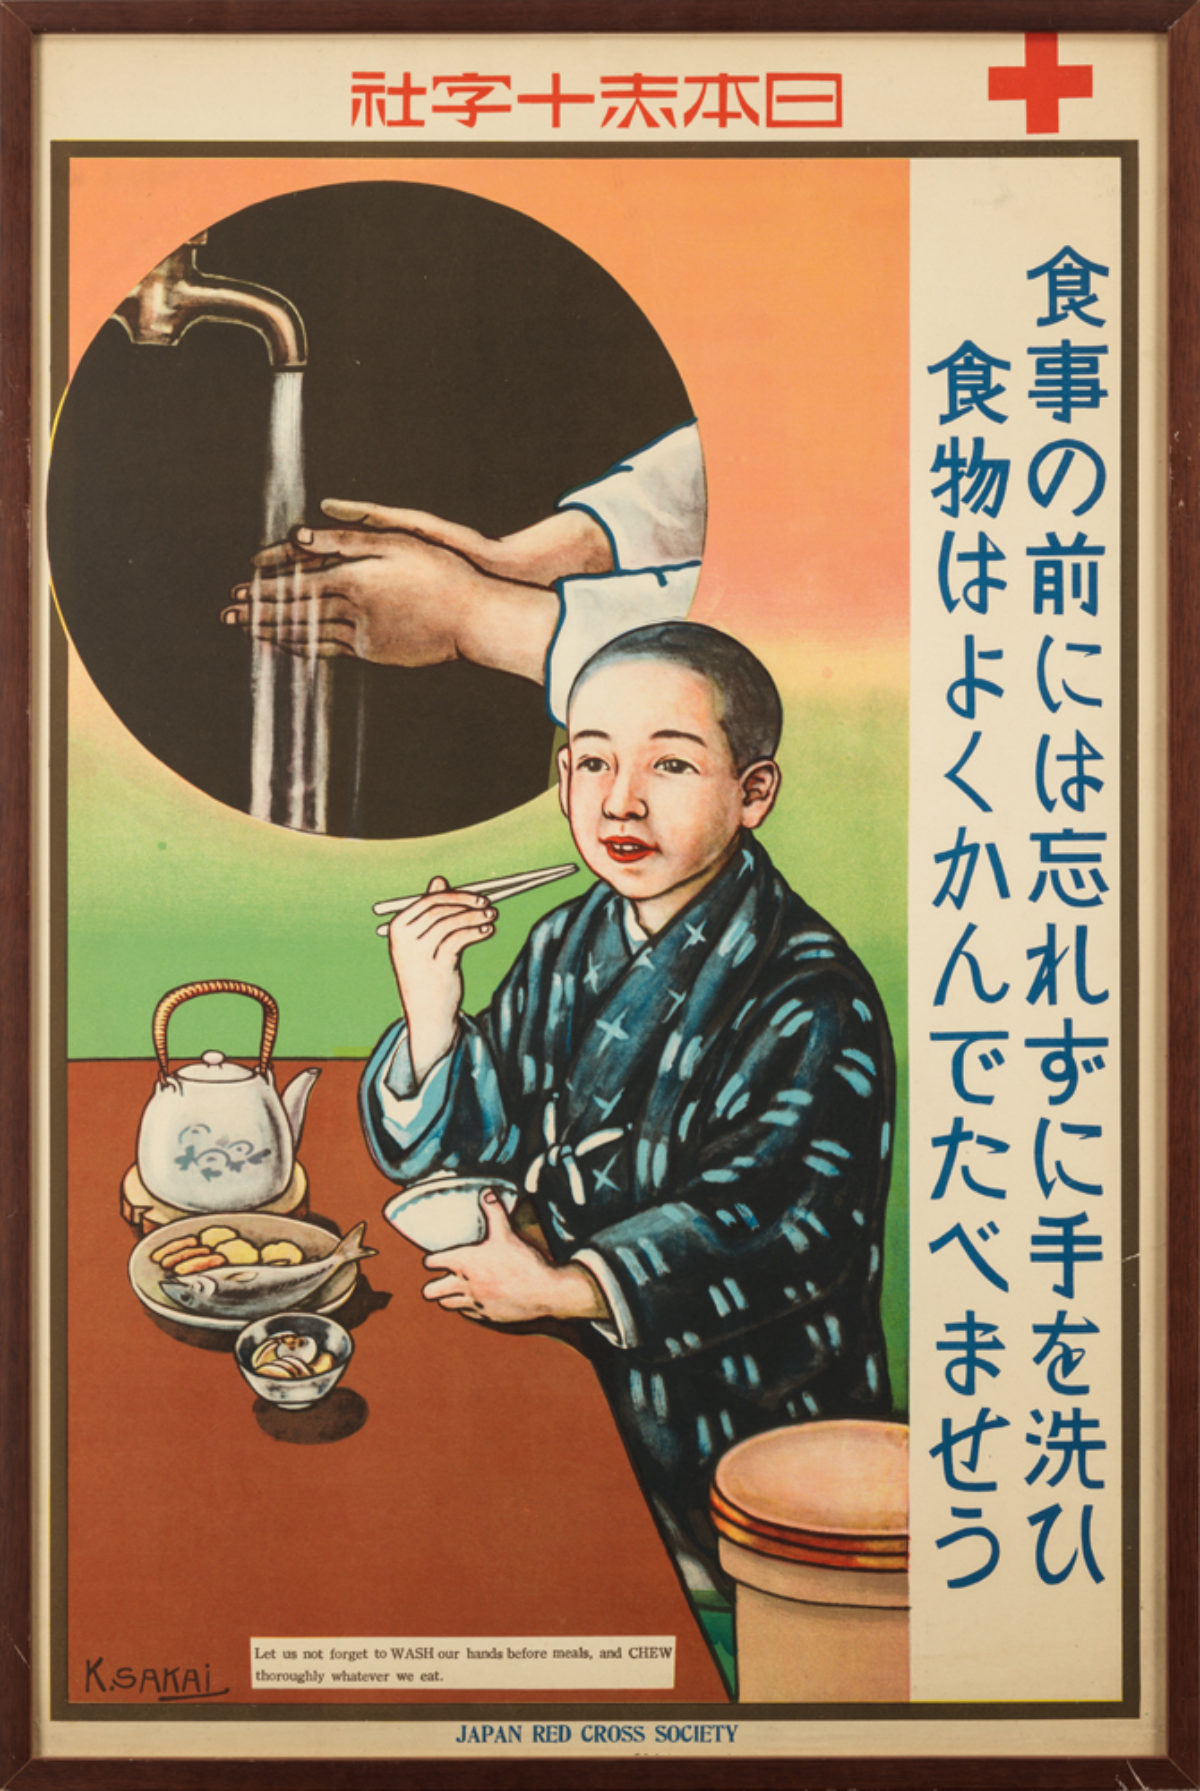 An illustrative poster of a person in a kimono eating by a table with washing hands in the background.